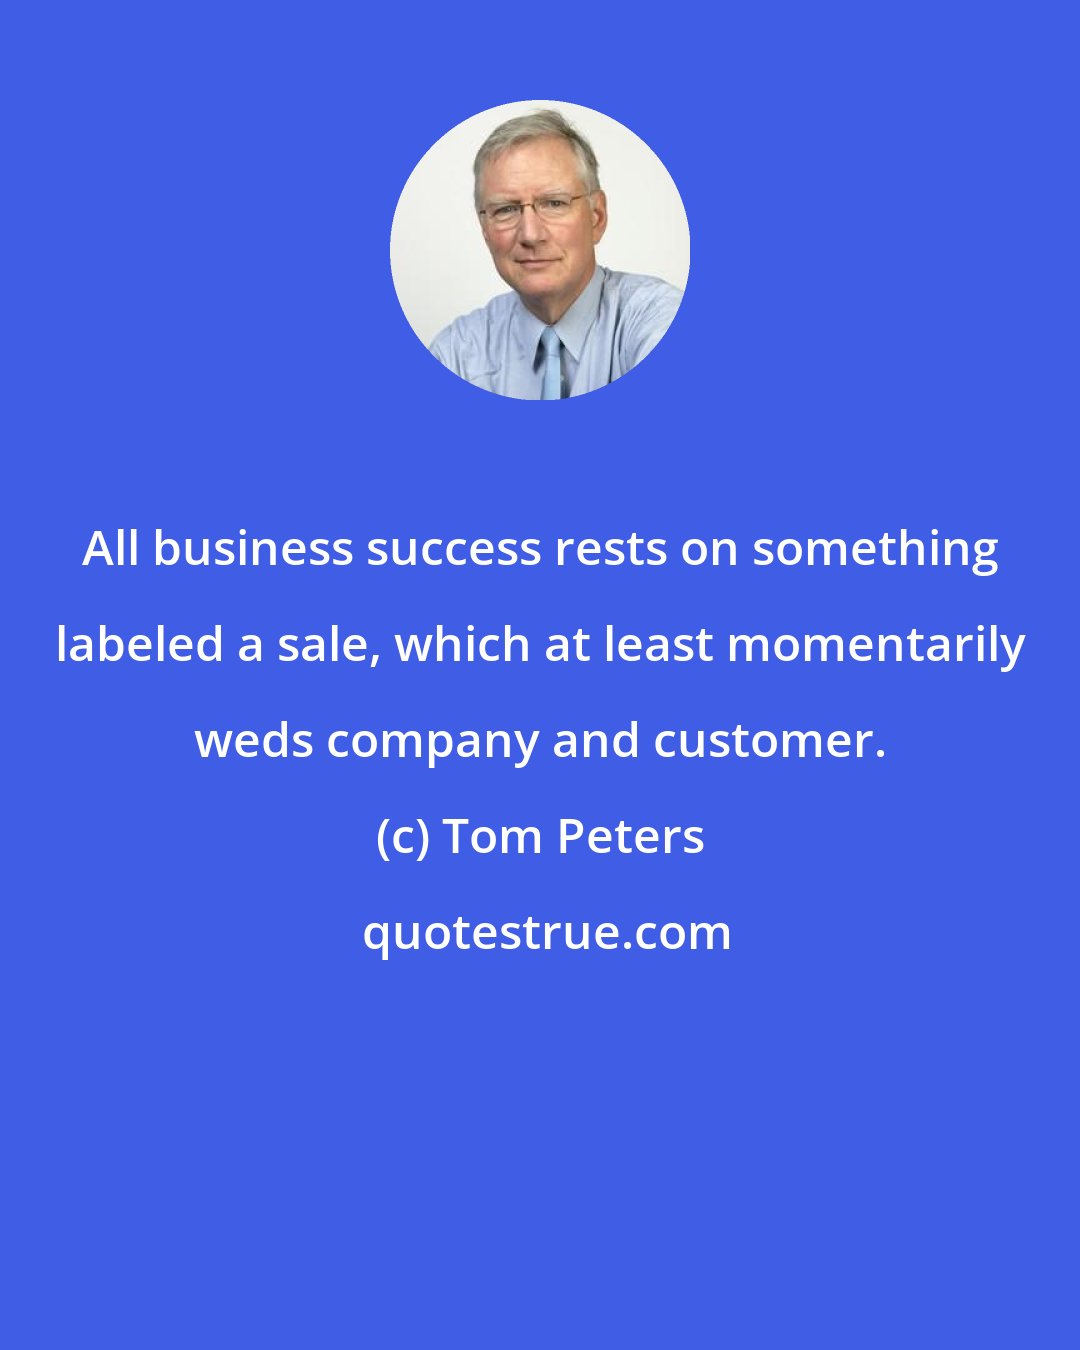 Tom Peters: All business success rests on something labeled a sale, which at least momentarily weds company and customer.